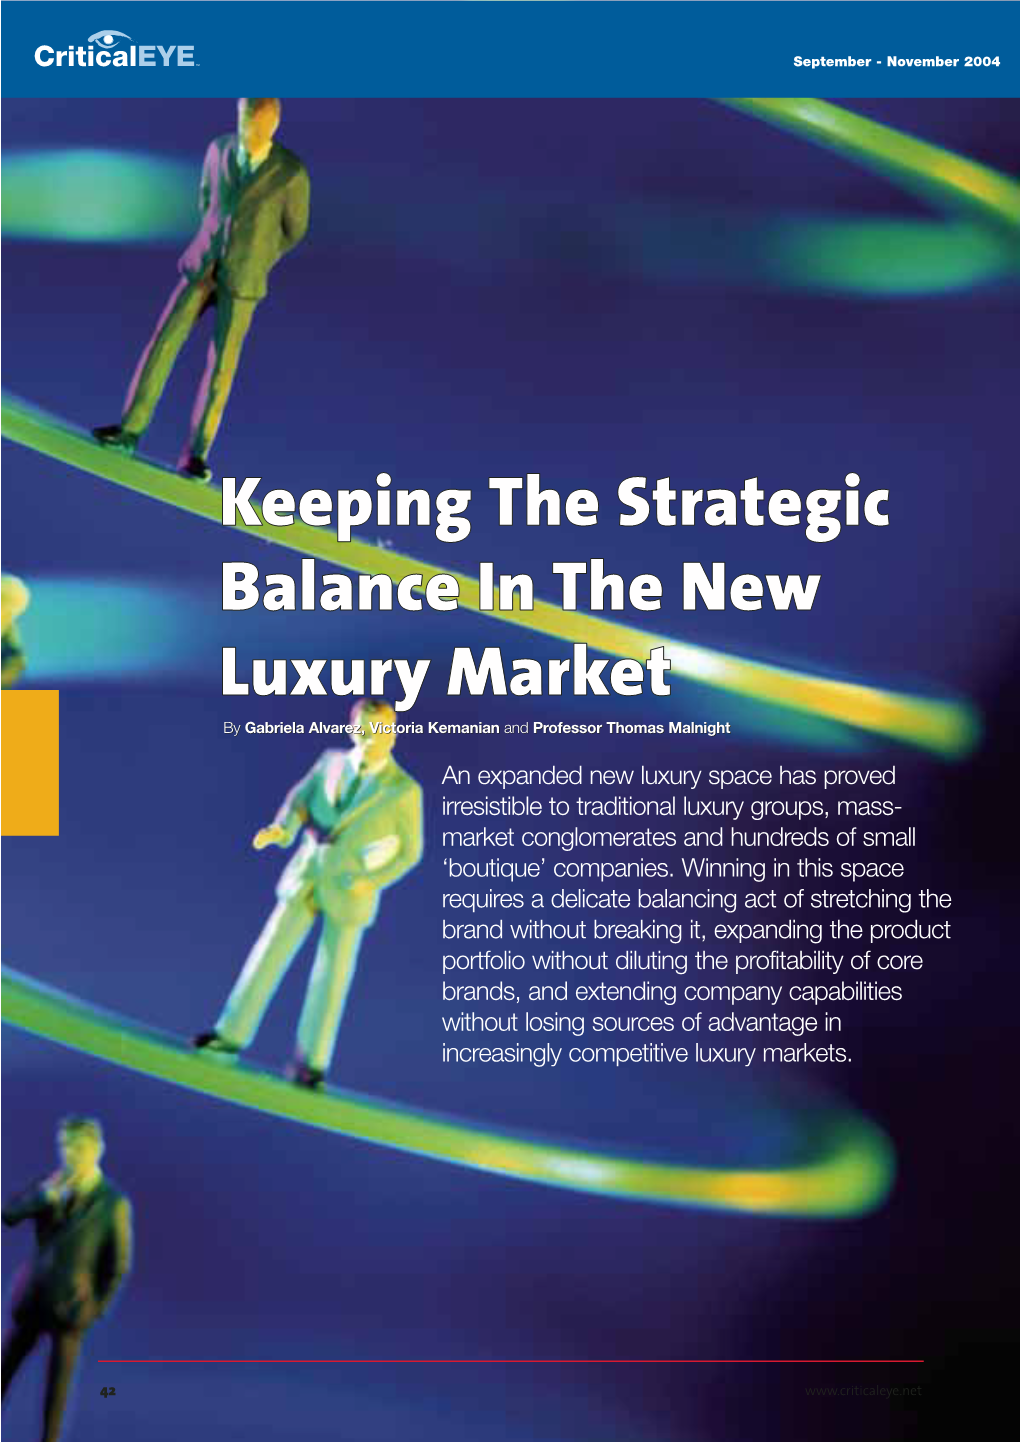 Keeping the Strategic Balance in the New Luxury Market